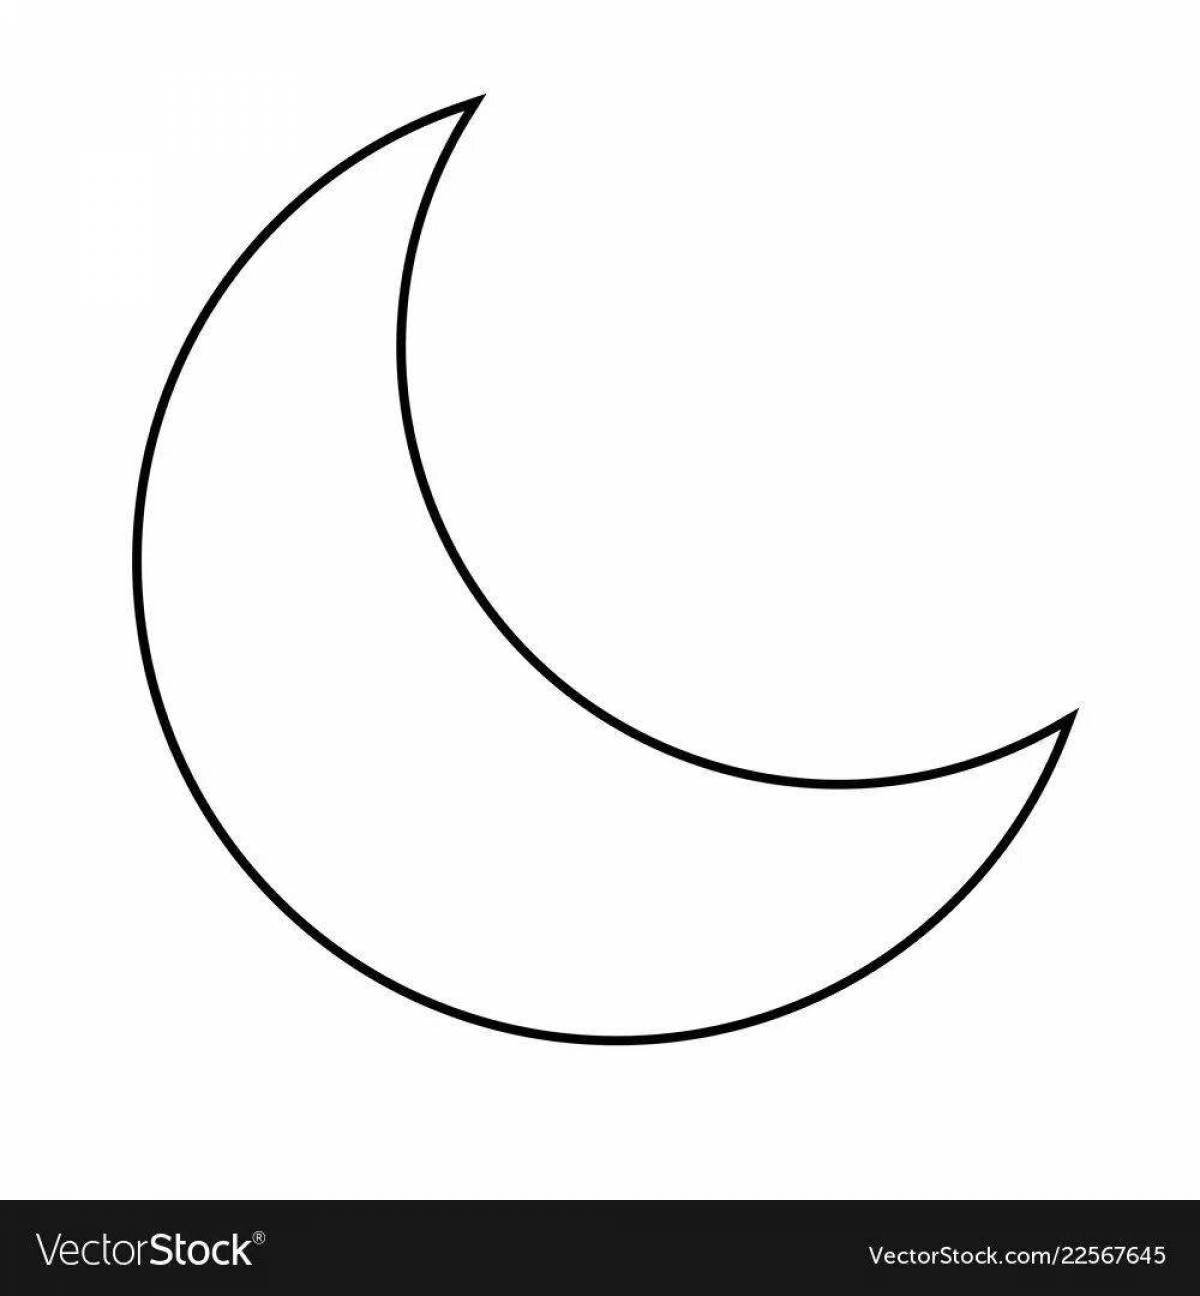 Playful half moon coloring page